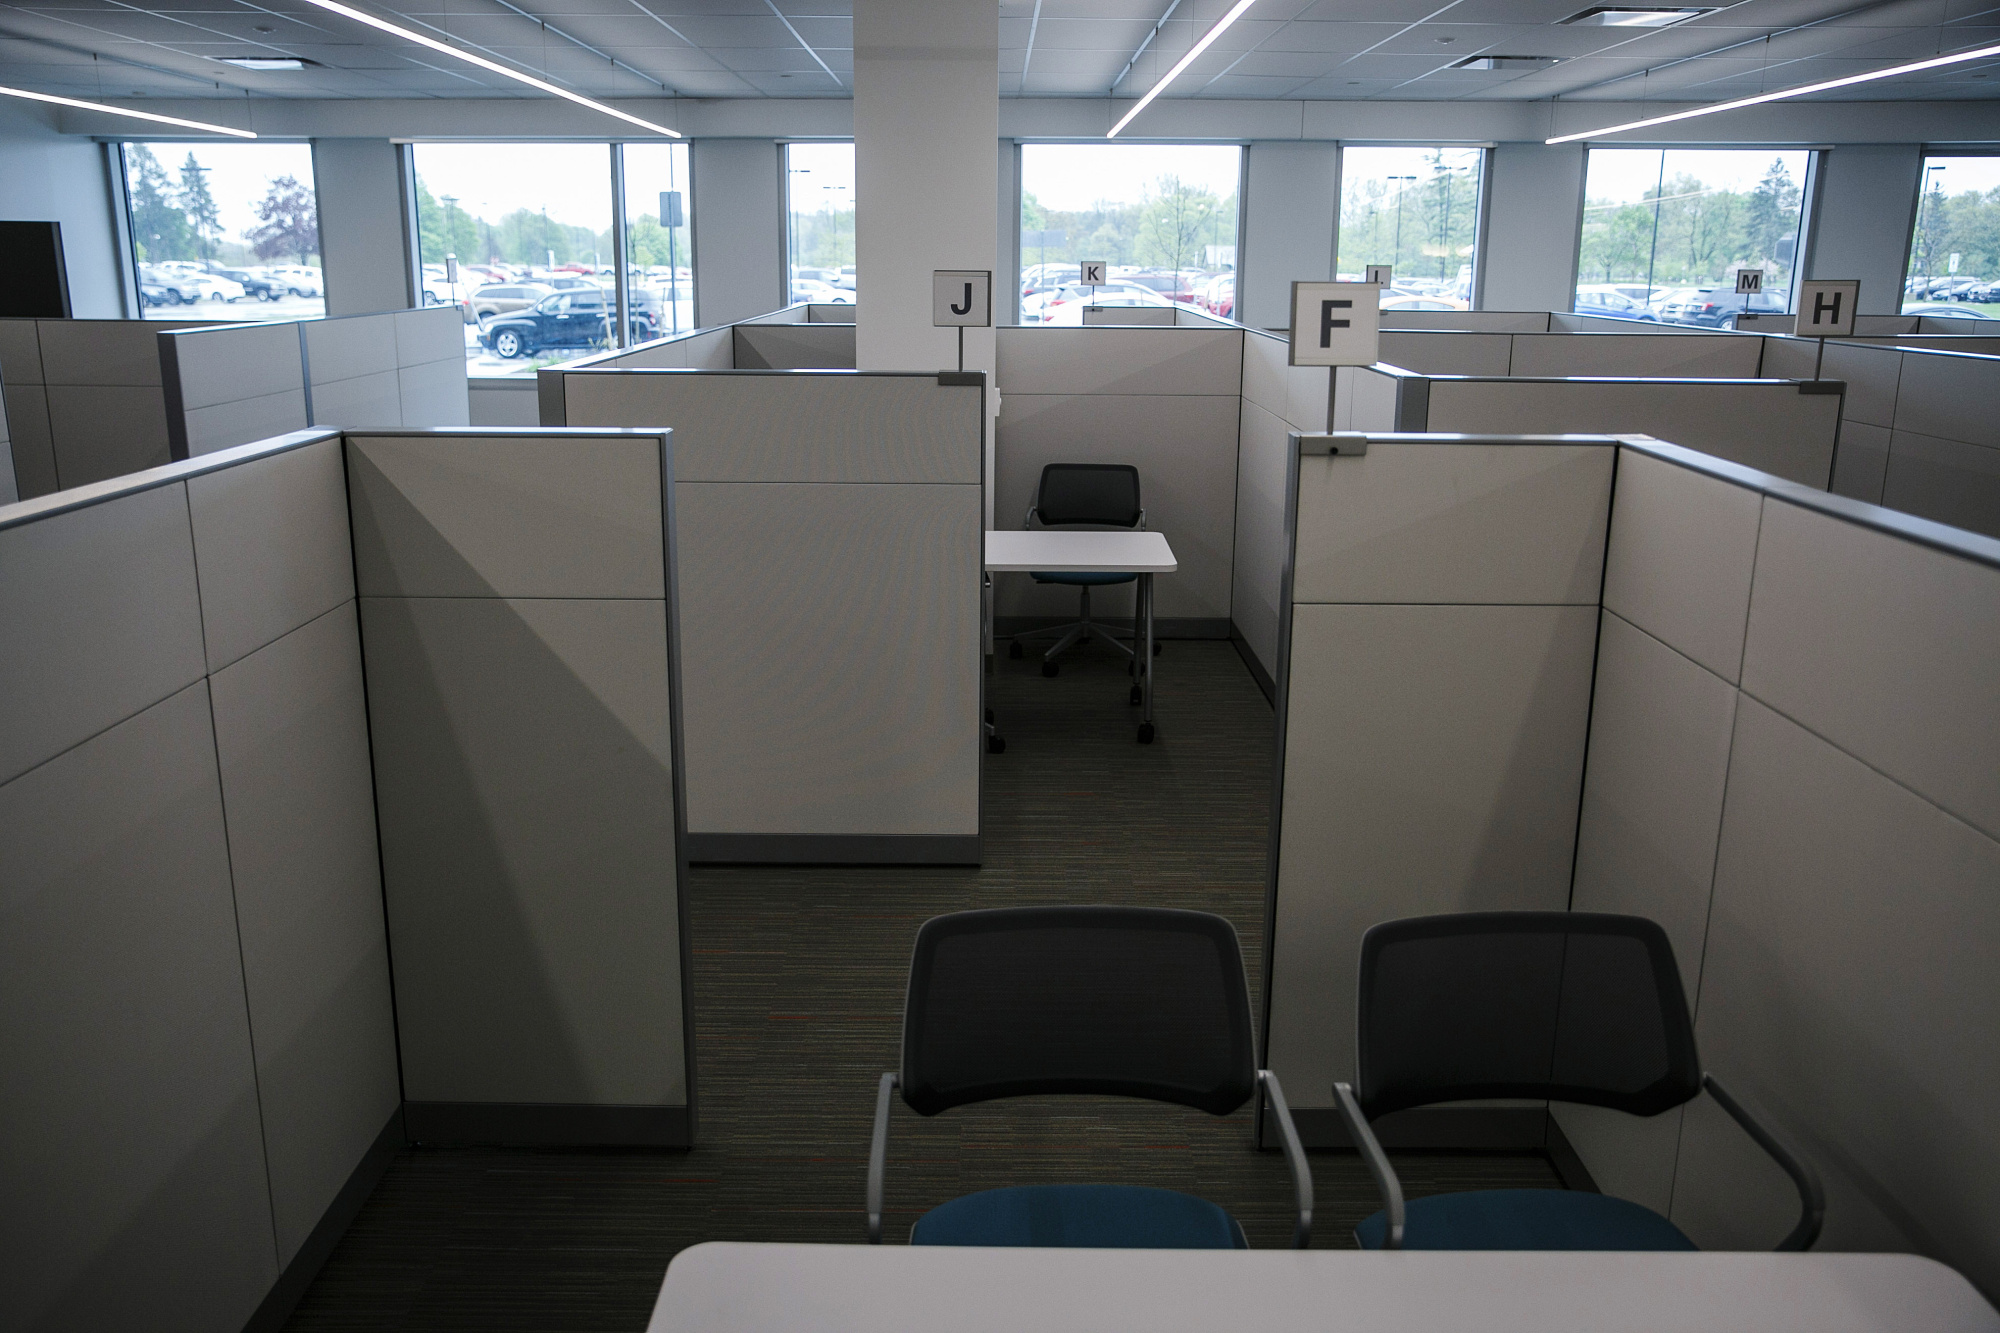 Office cubicles stand during a grand opening ceremony at the expanded Toyota Motor North American Research &amp; Development (TMNA R&amp;D) center in York Township, Michigan, U.S.